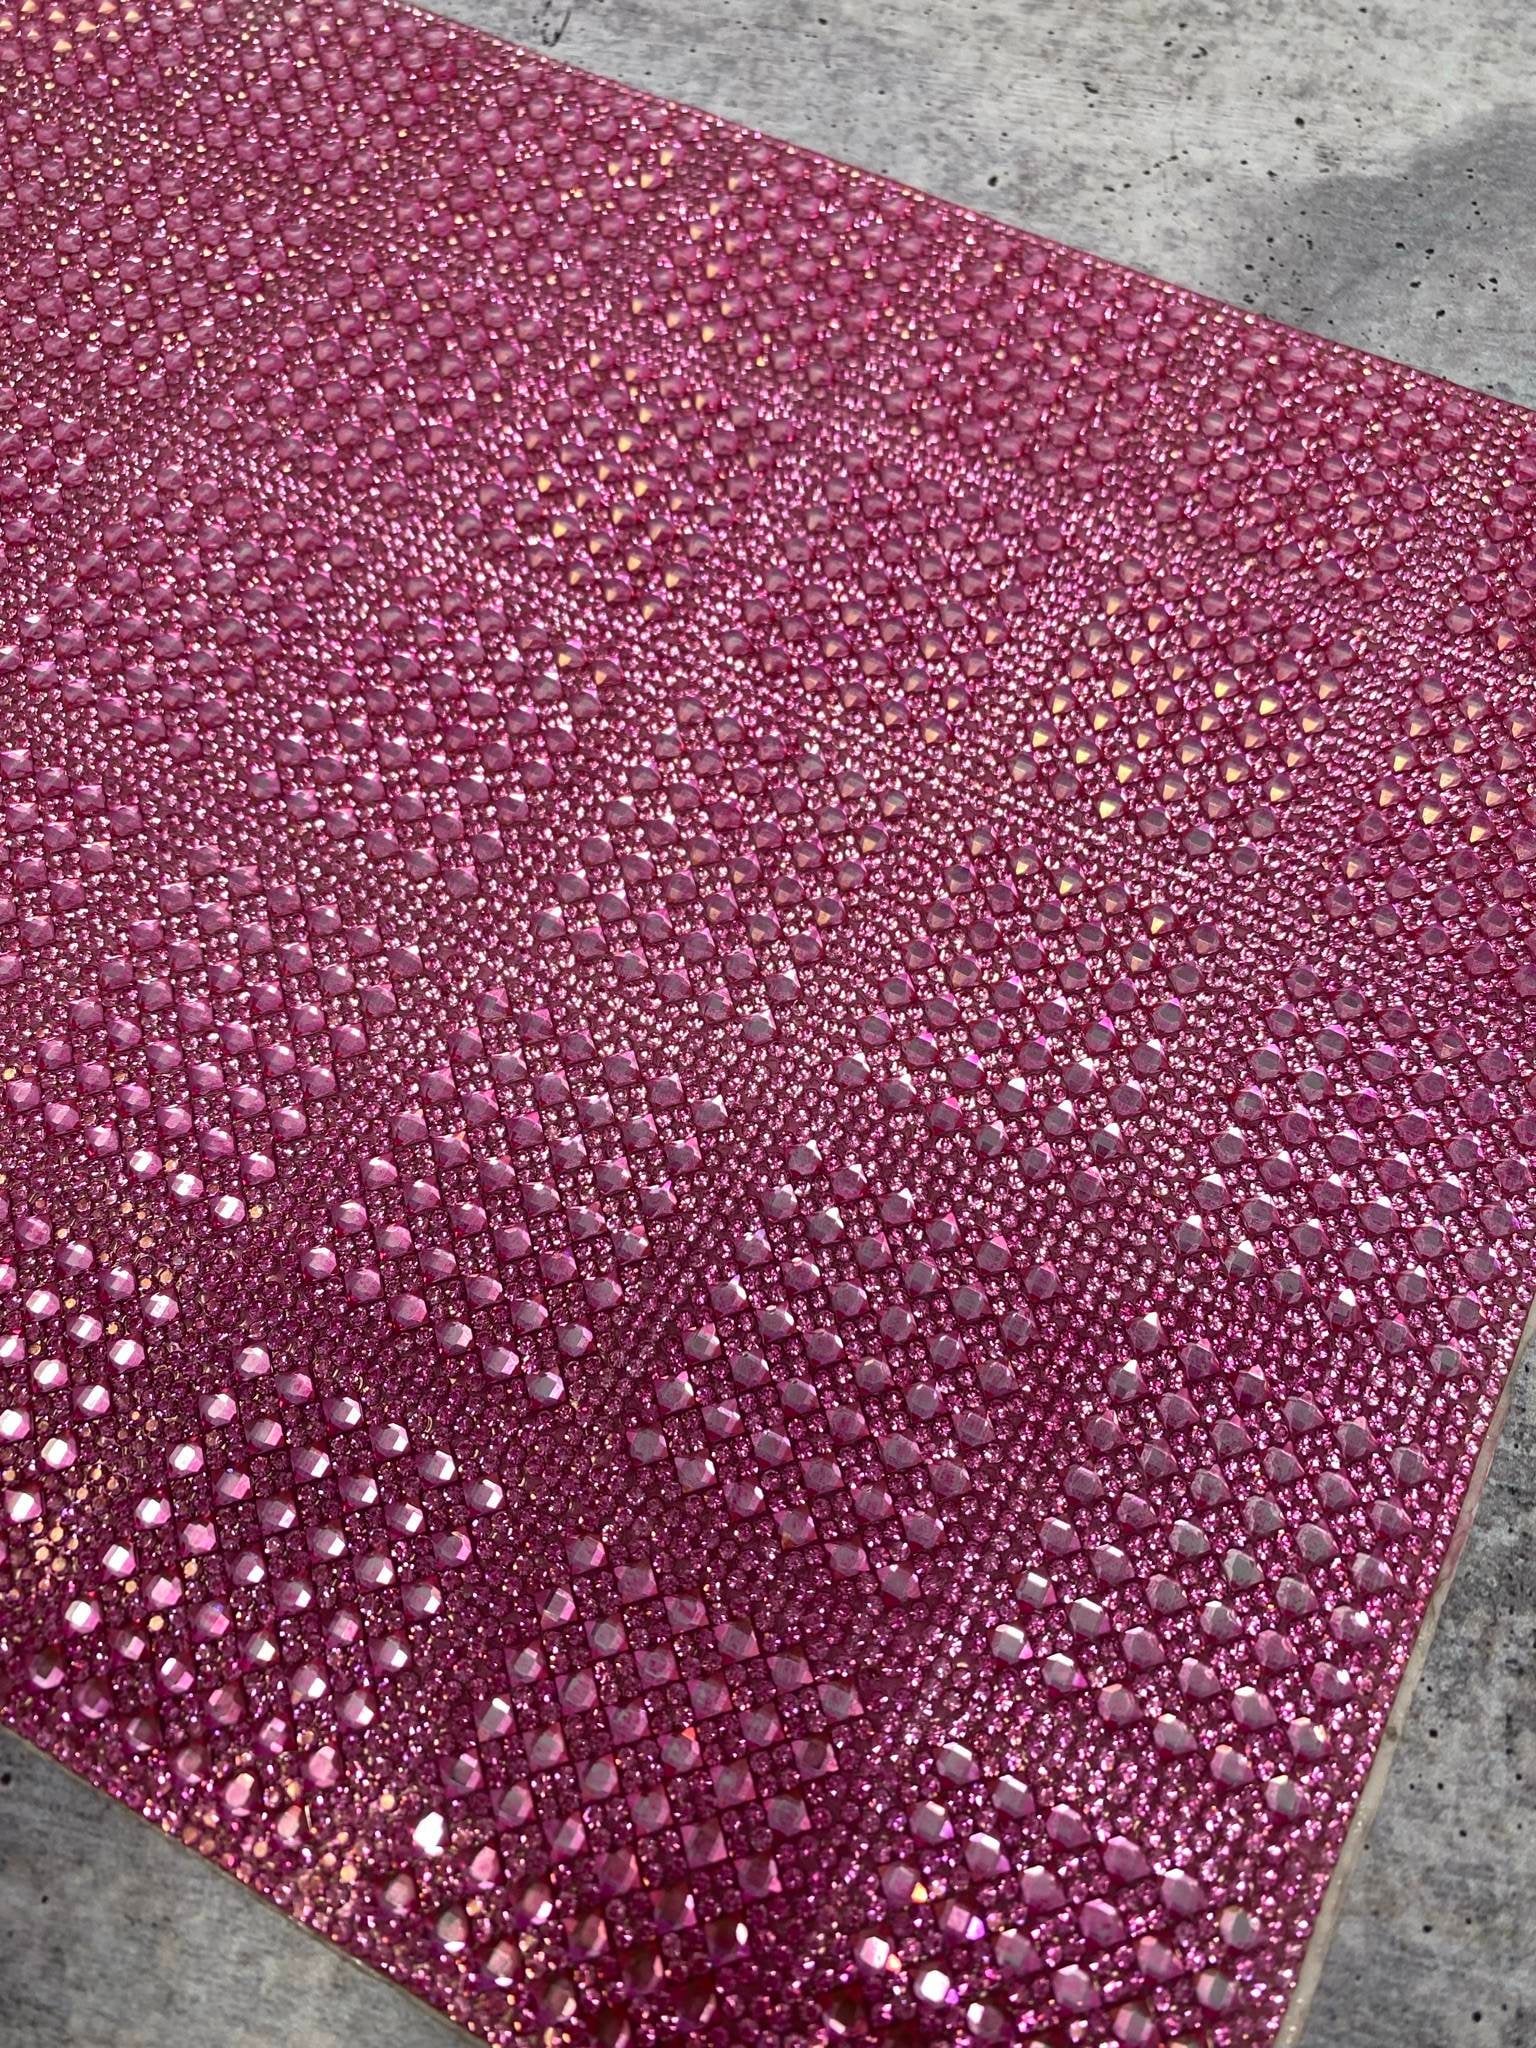 Square PINK Stones, Self-Adhesive Rhinestone Sheet, for Crafts: Blinging Clothes, Shoes, Handbags, Mugs & Wine Glasses,Size  10" x_Ê16.5"